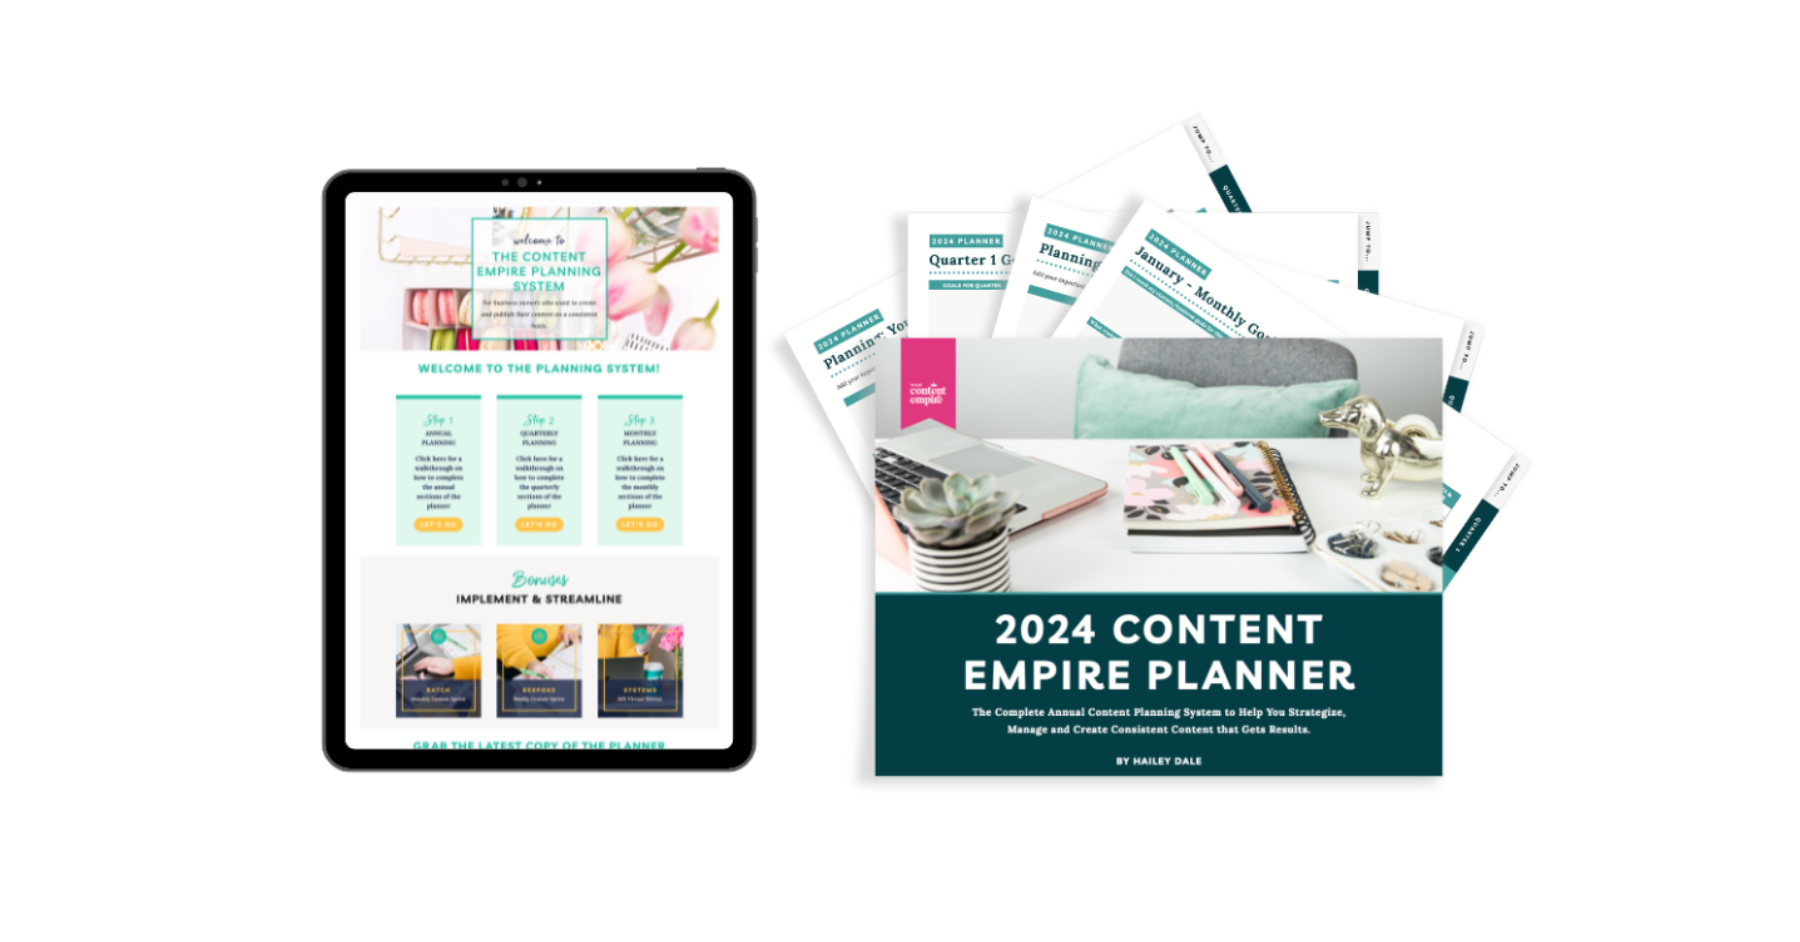 Shop Page - The 2024 Content Empire Planner